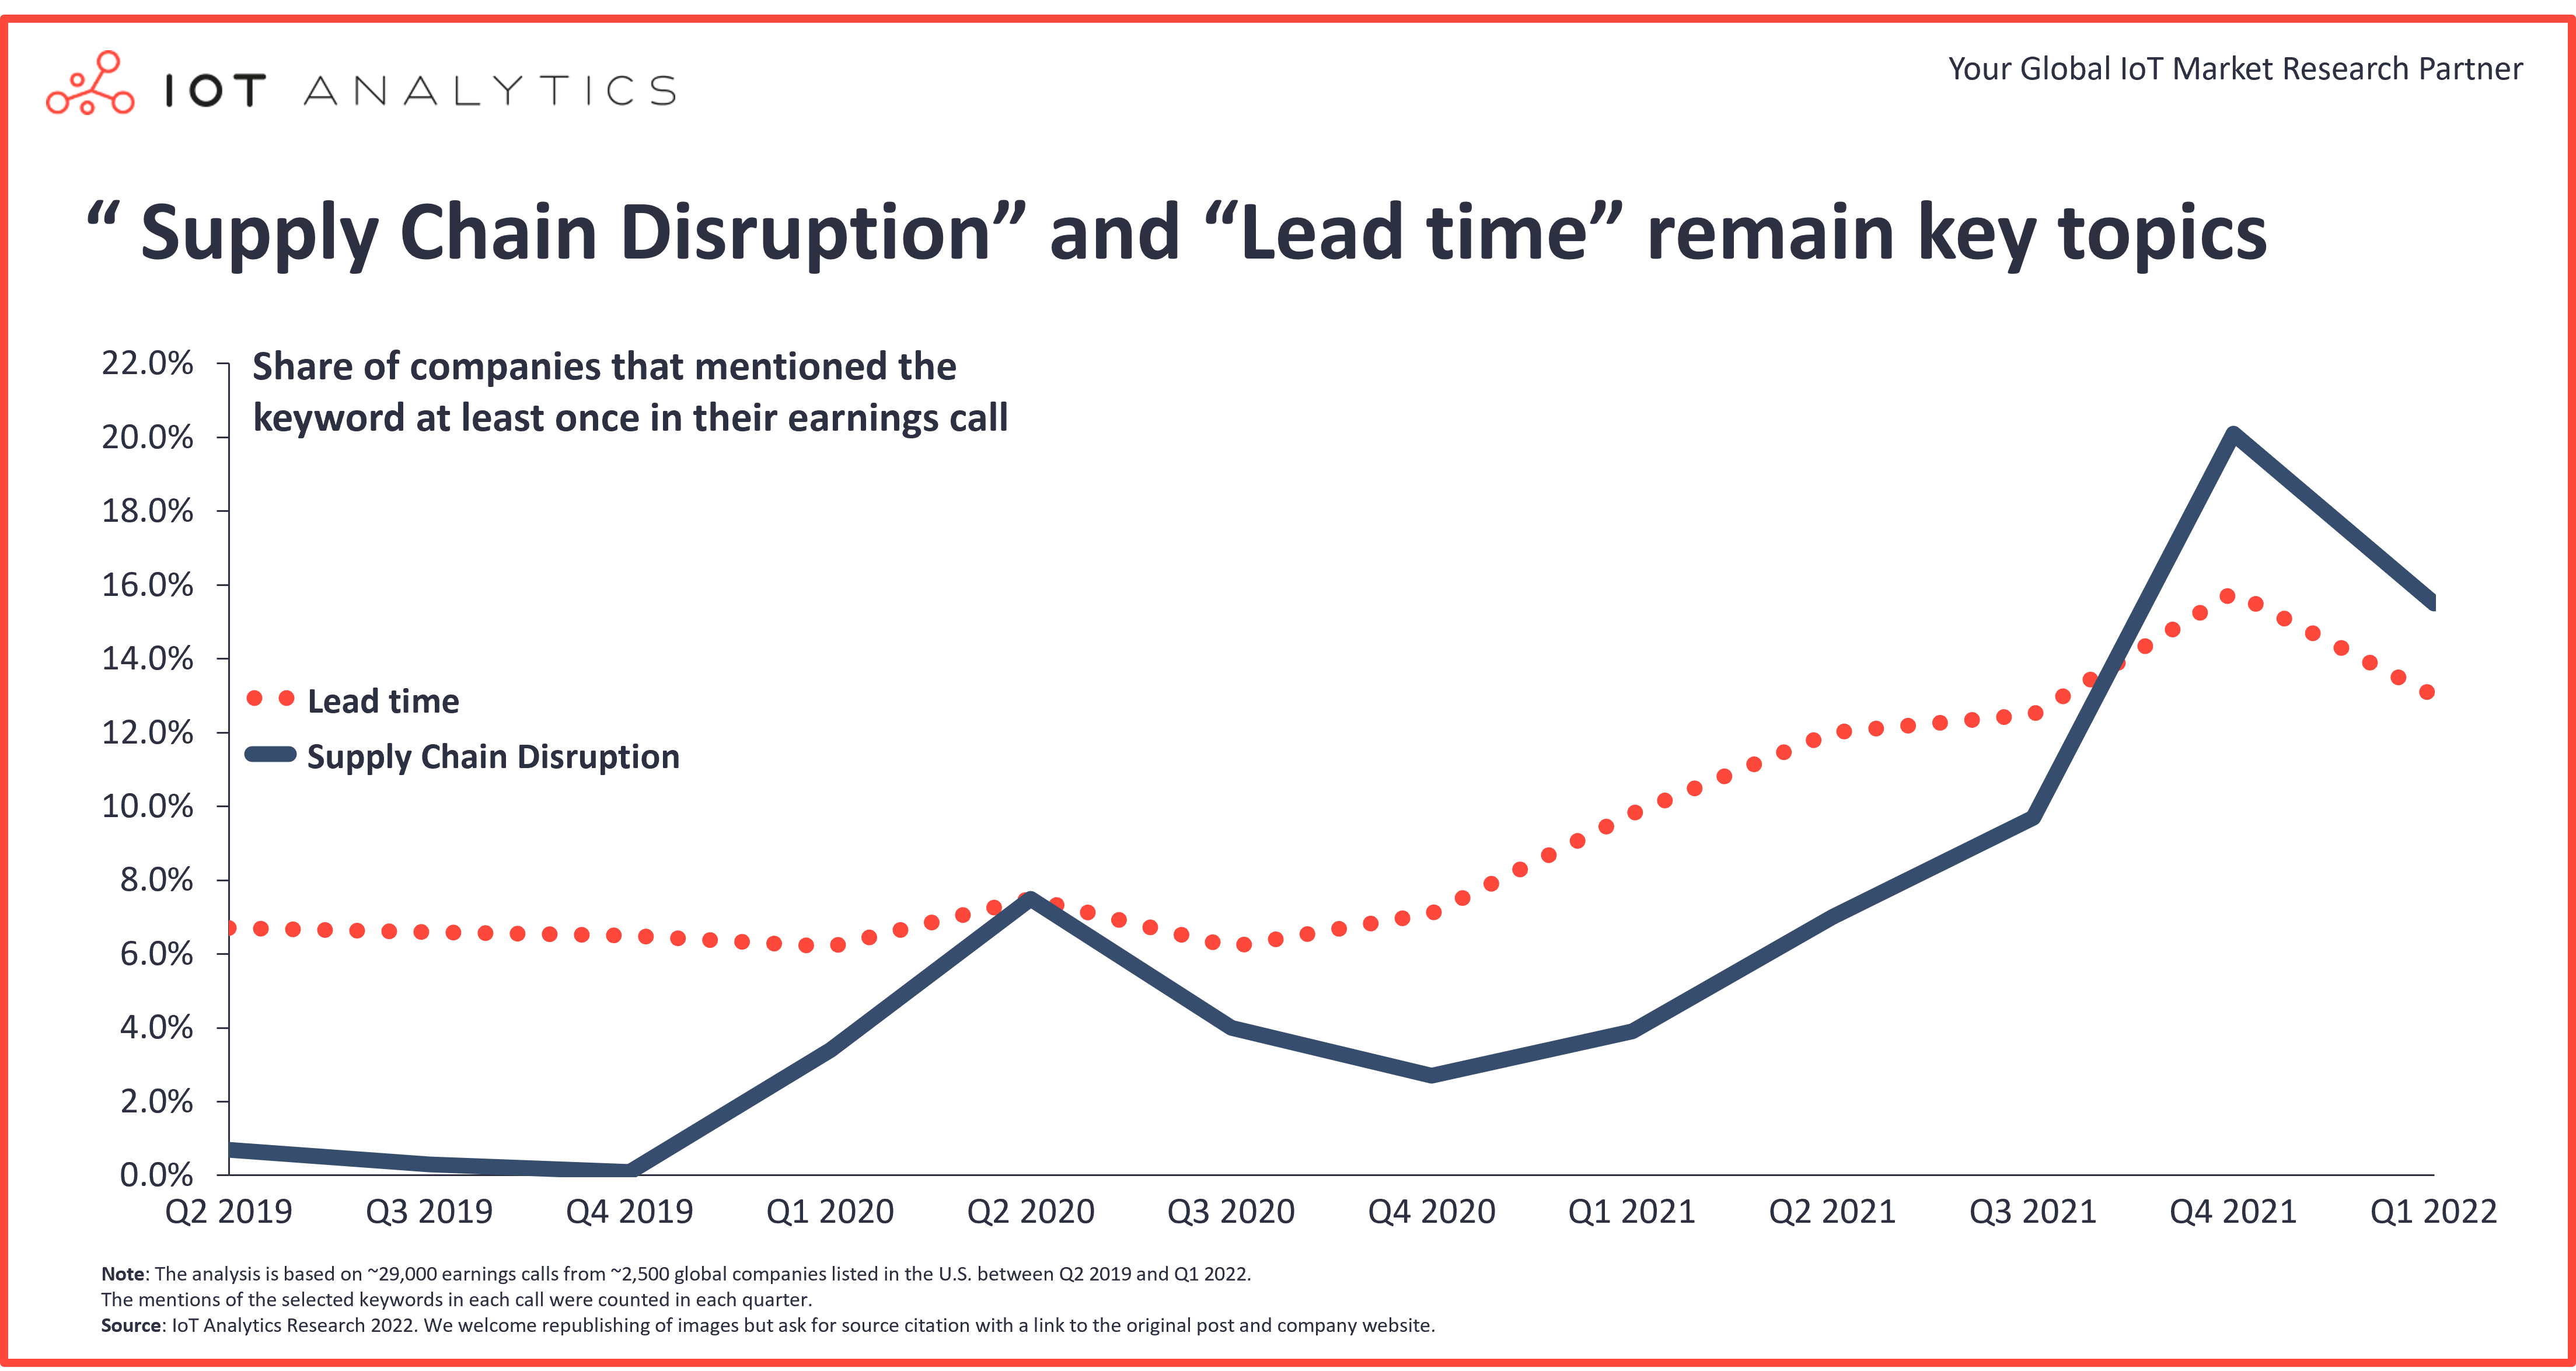 Supply chain disruption and lead time remain key topics